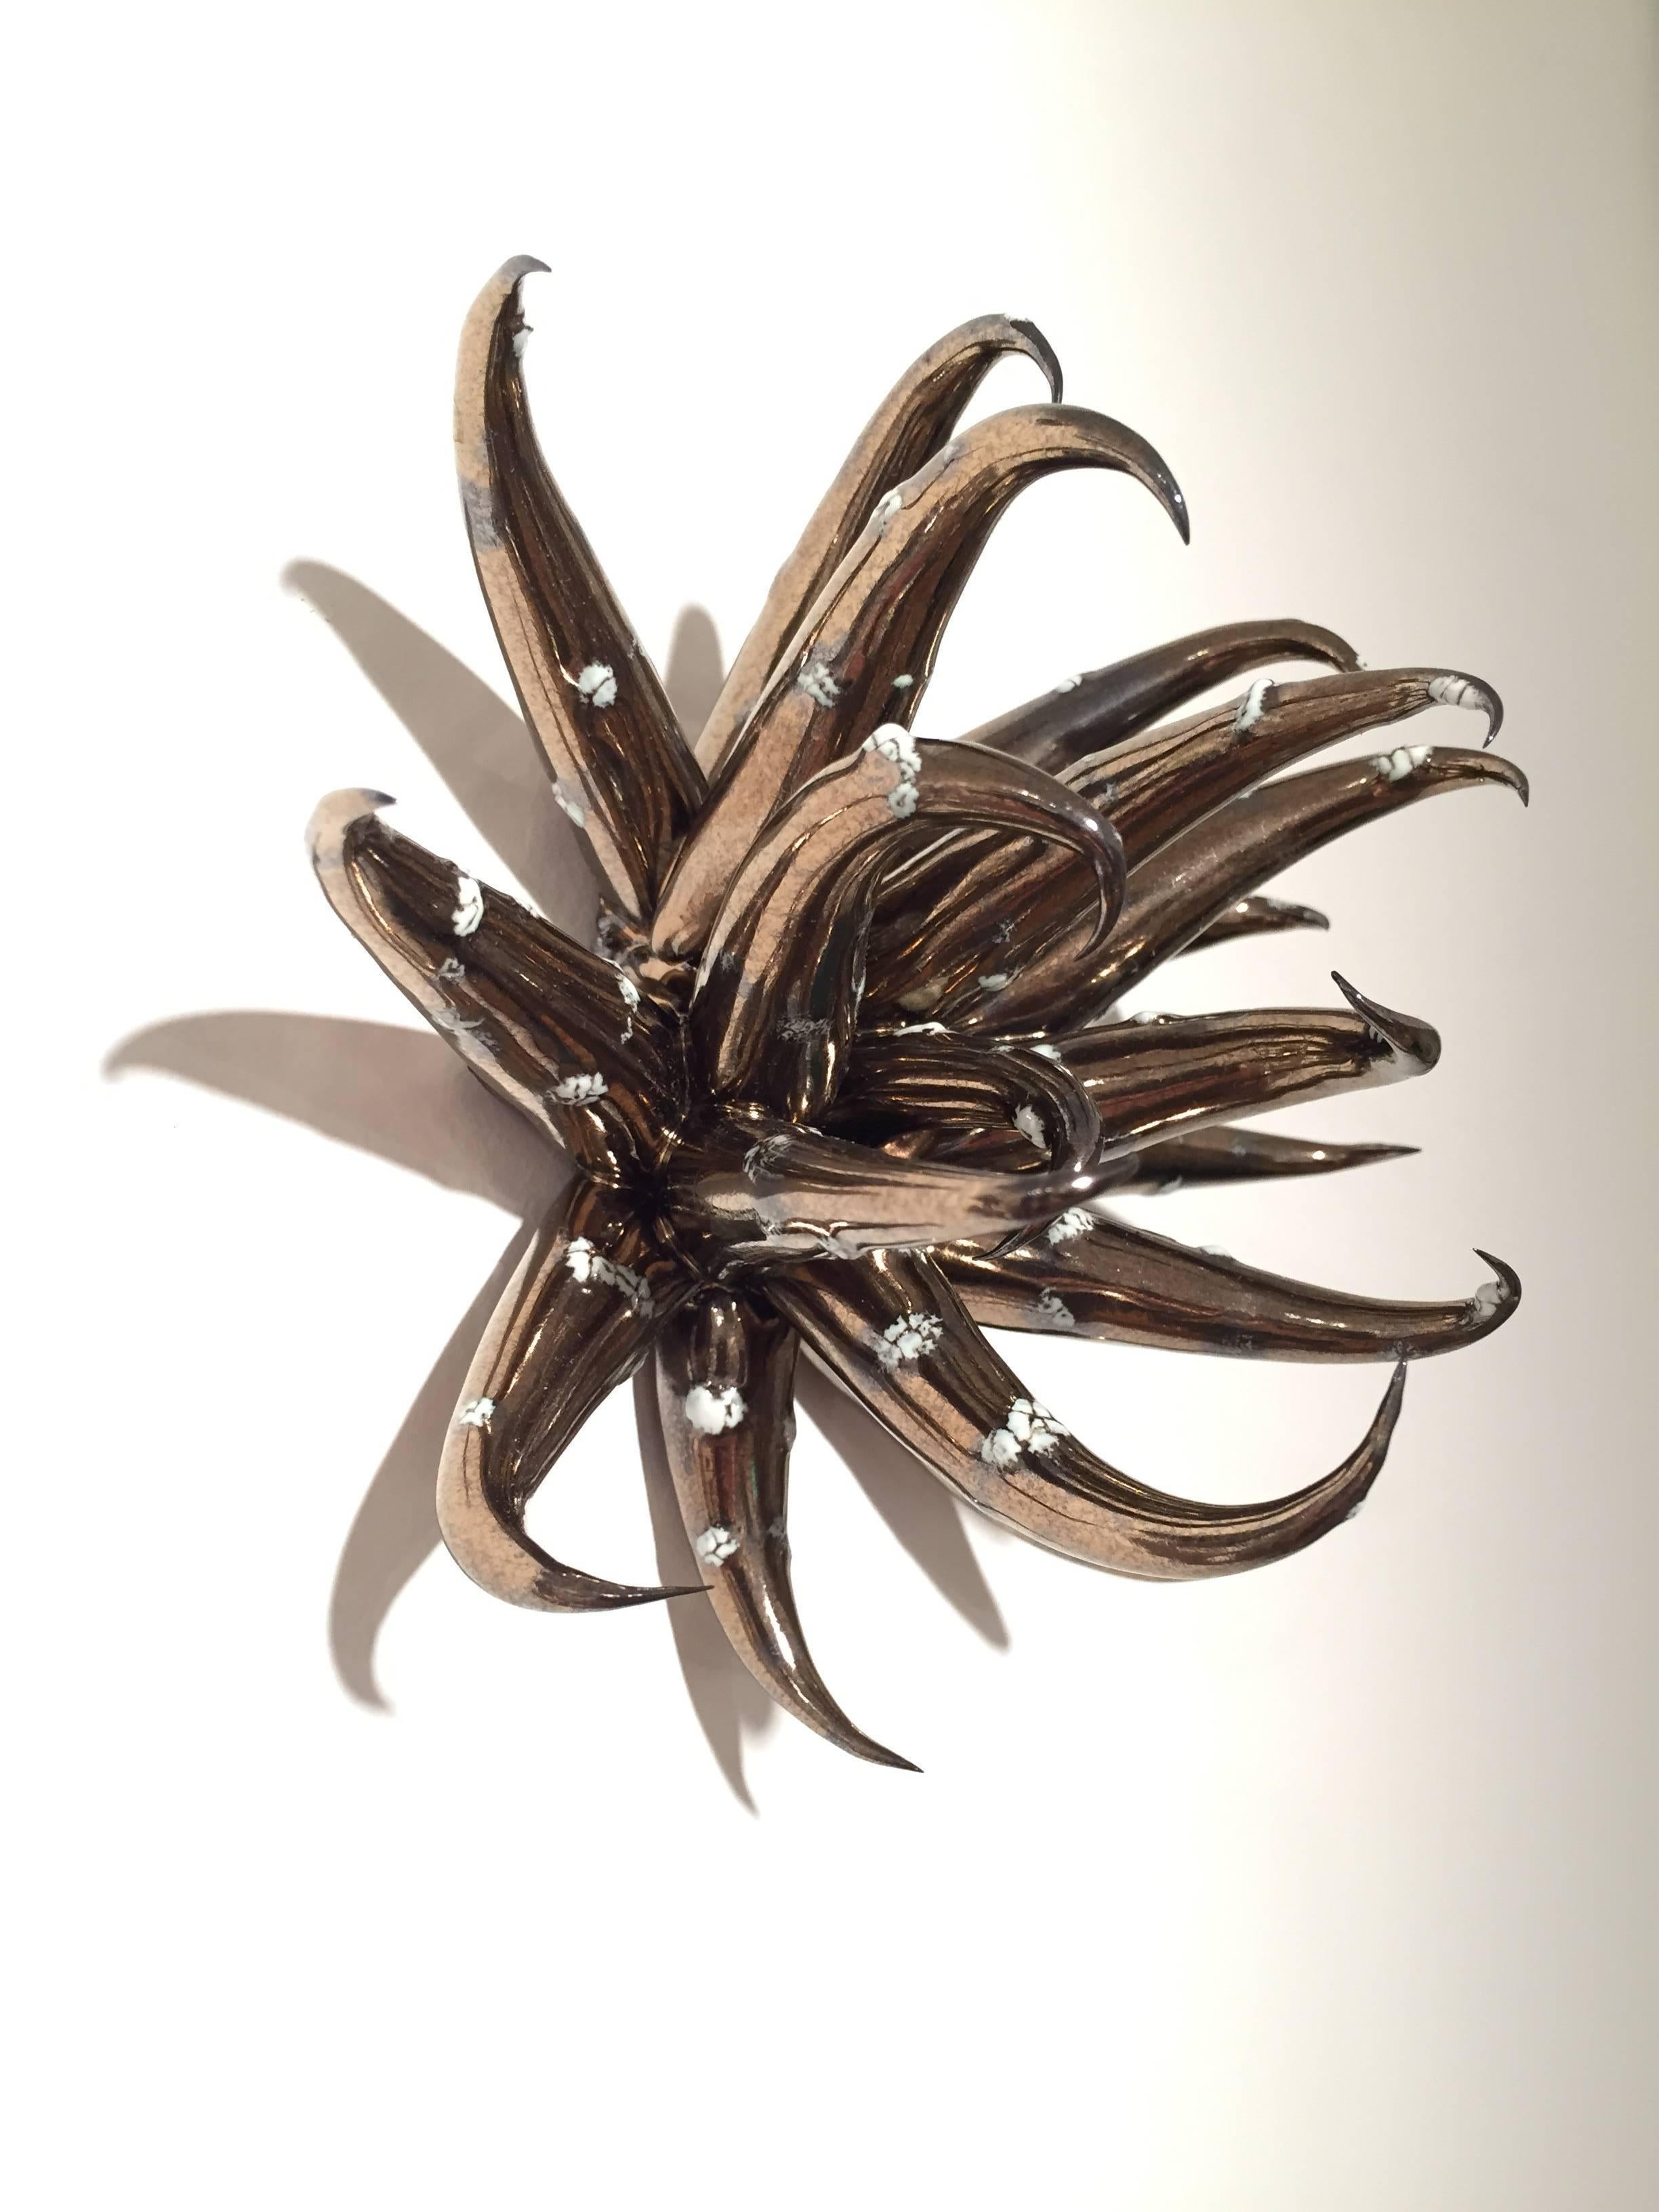 Christopher Adams creates sculptures that play on biological concepts, specifically adaptive radiation, whereby a pioneering organism enters an untapped environment and then differentiates rapidly without departing too much from its original form.